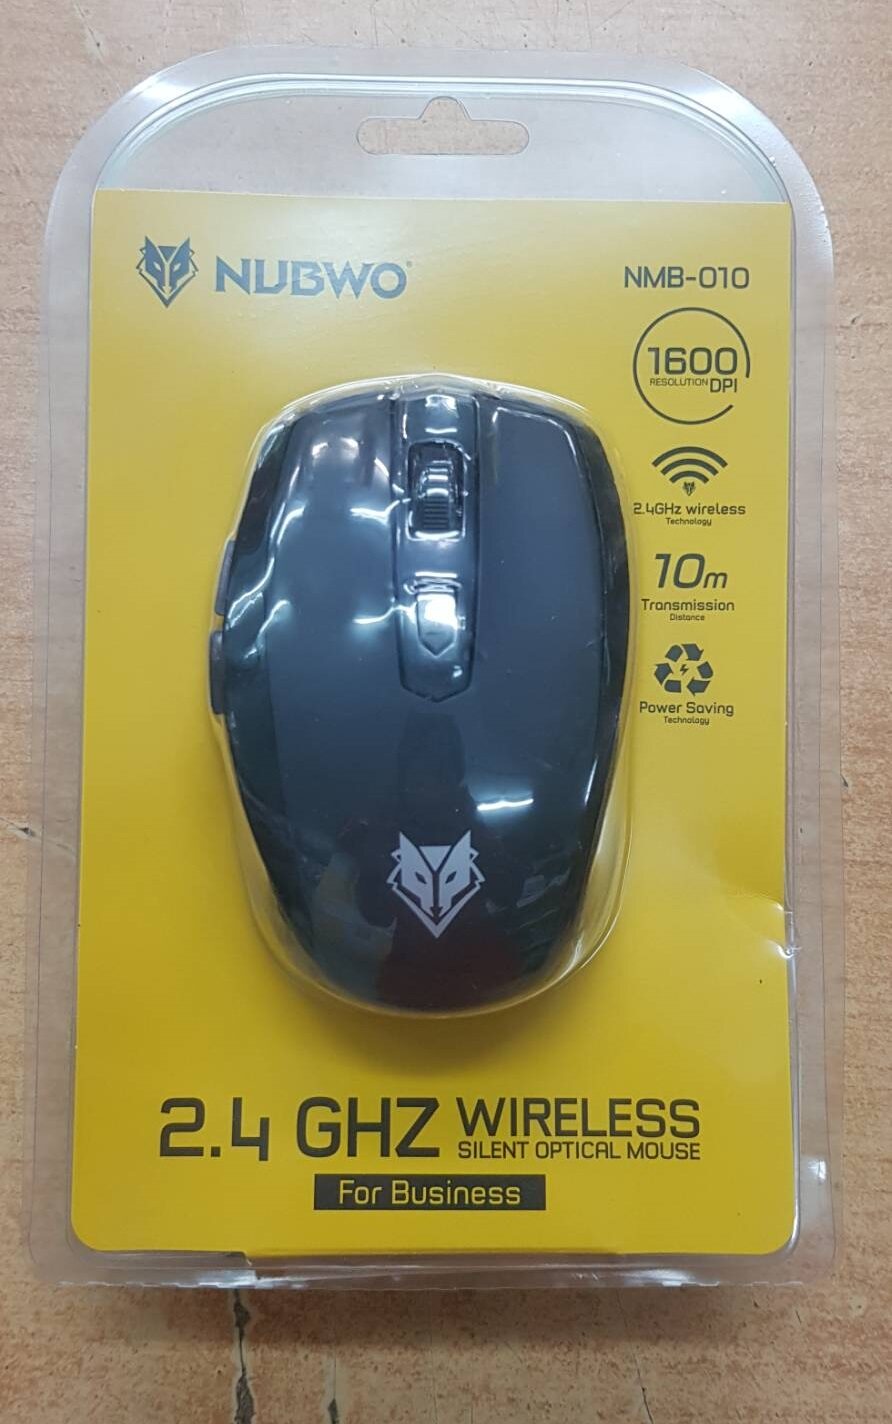 Mouse Wireless NMB-010 Nubwo